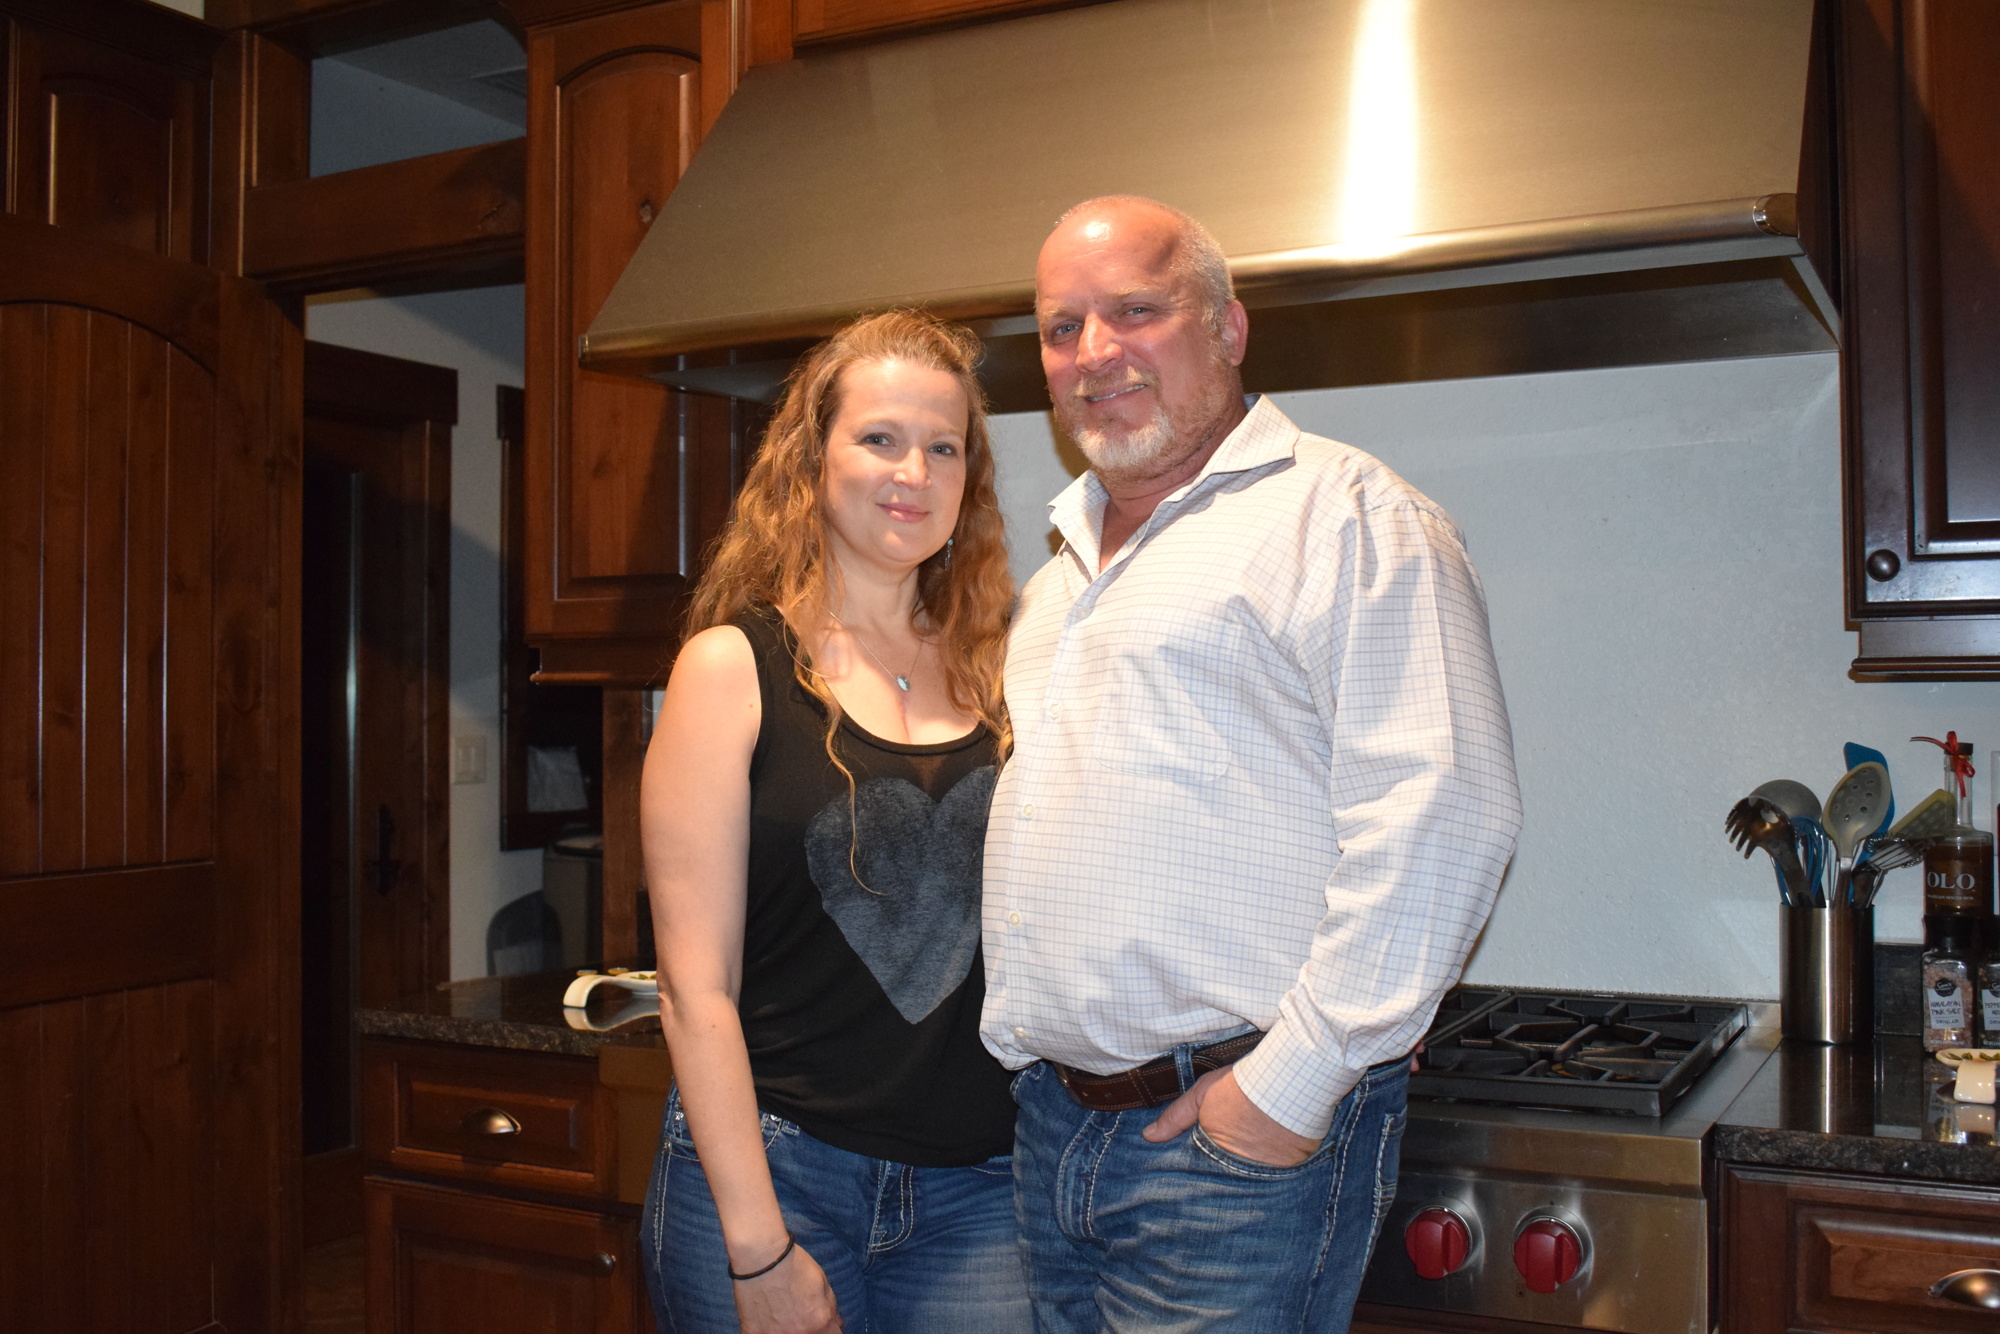 Gary Bergstrom and Angela Horan will be married at their Myakka City home on March 20.